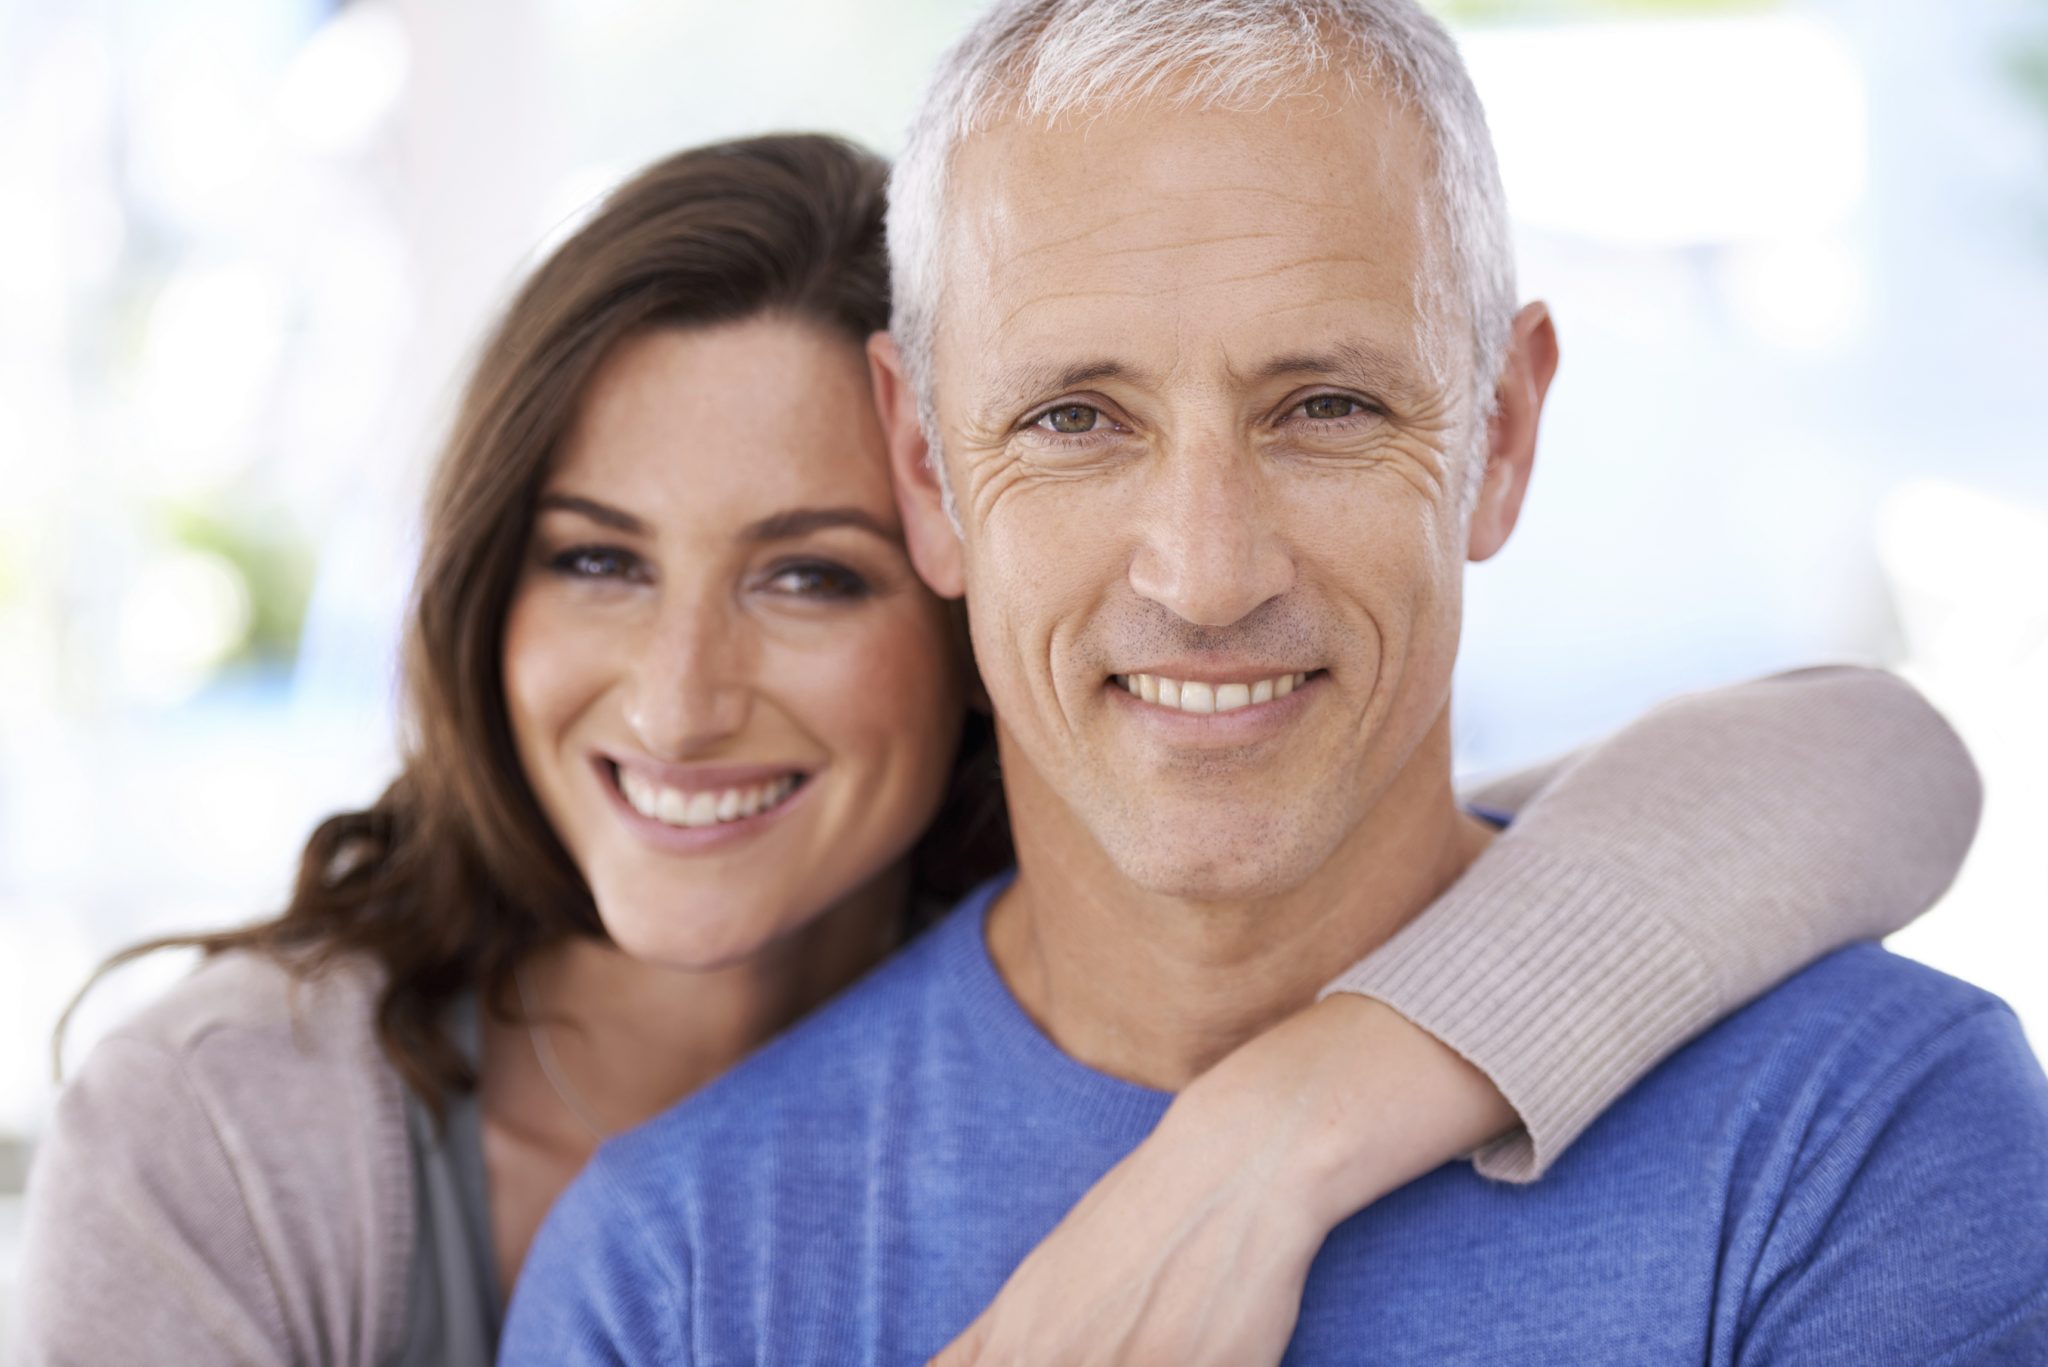 Man and woman with cerec crowns and bridges embracing.